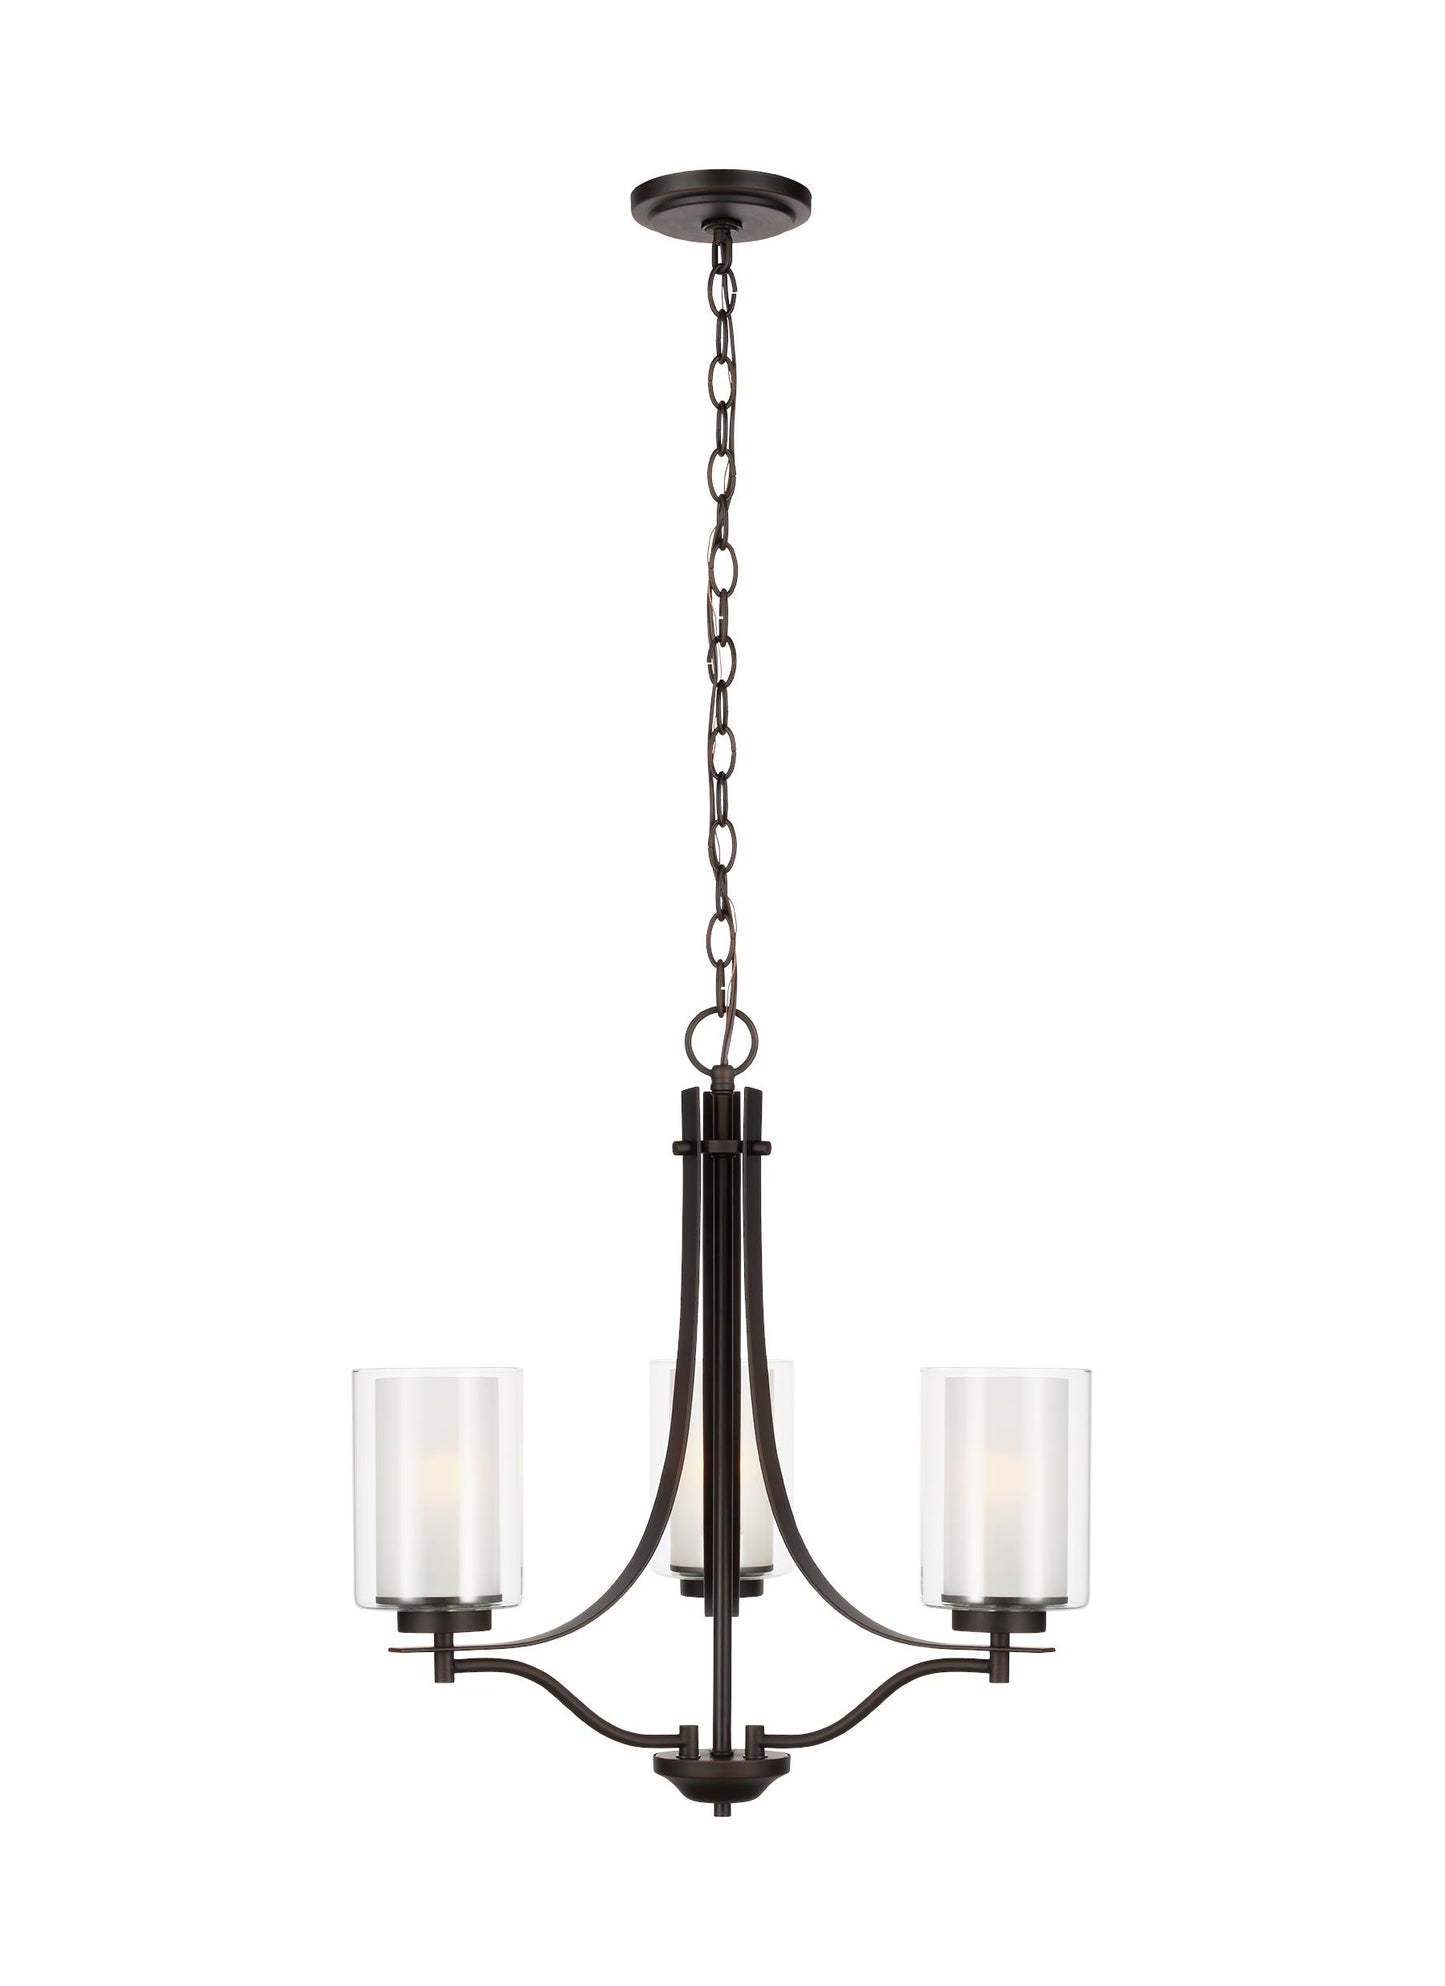 Elmwood Park traditional 3-light indoor dimmable ceiling chandelier pendant light in bronze finish with satin etched glass...